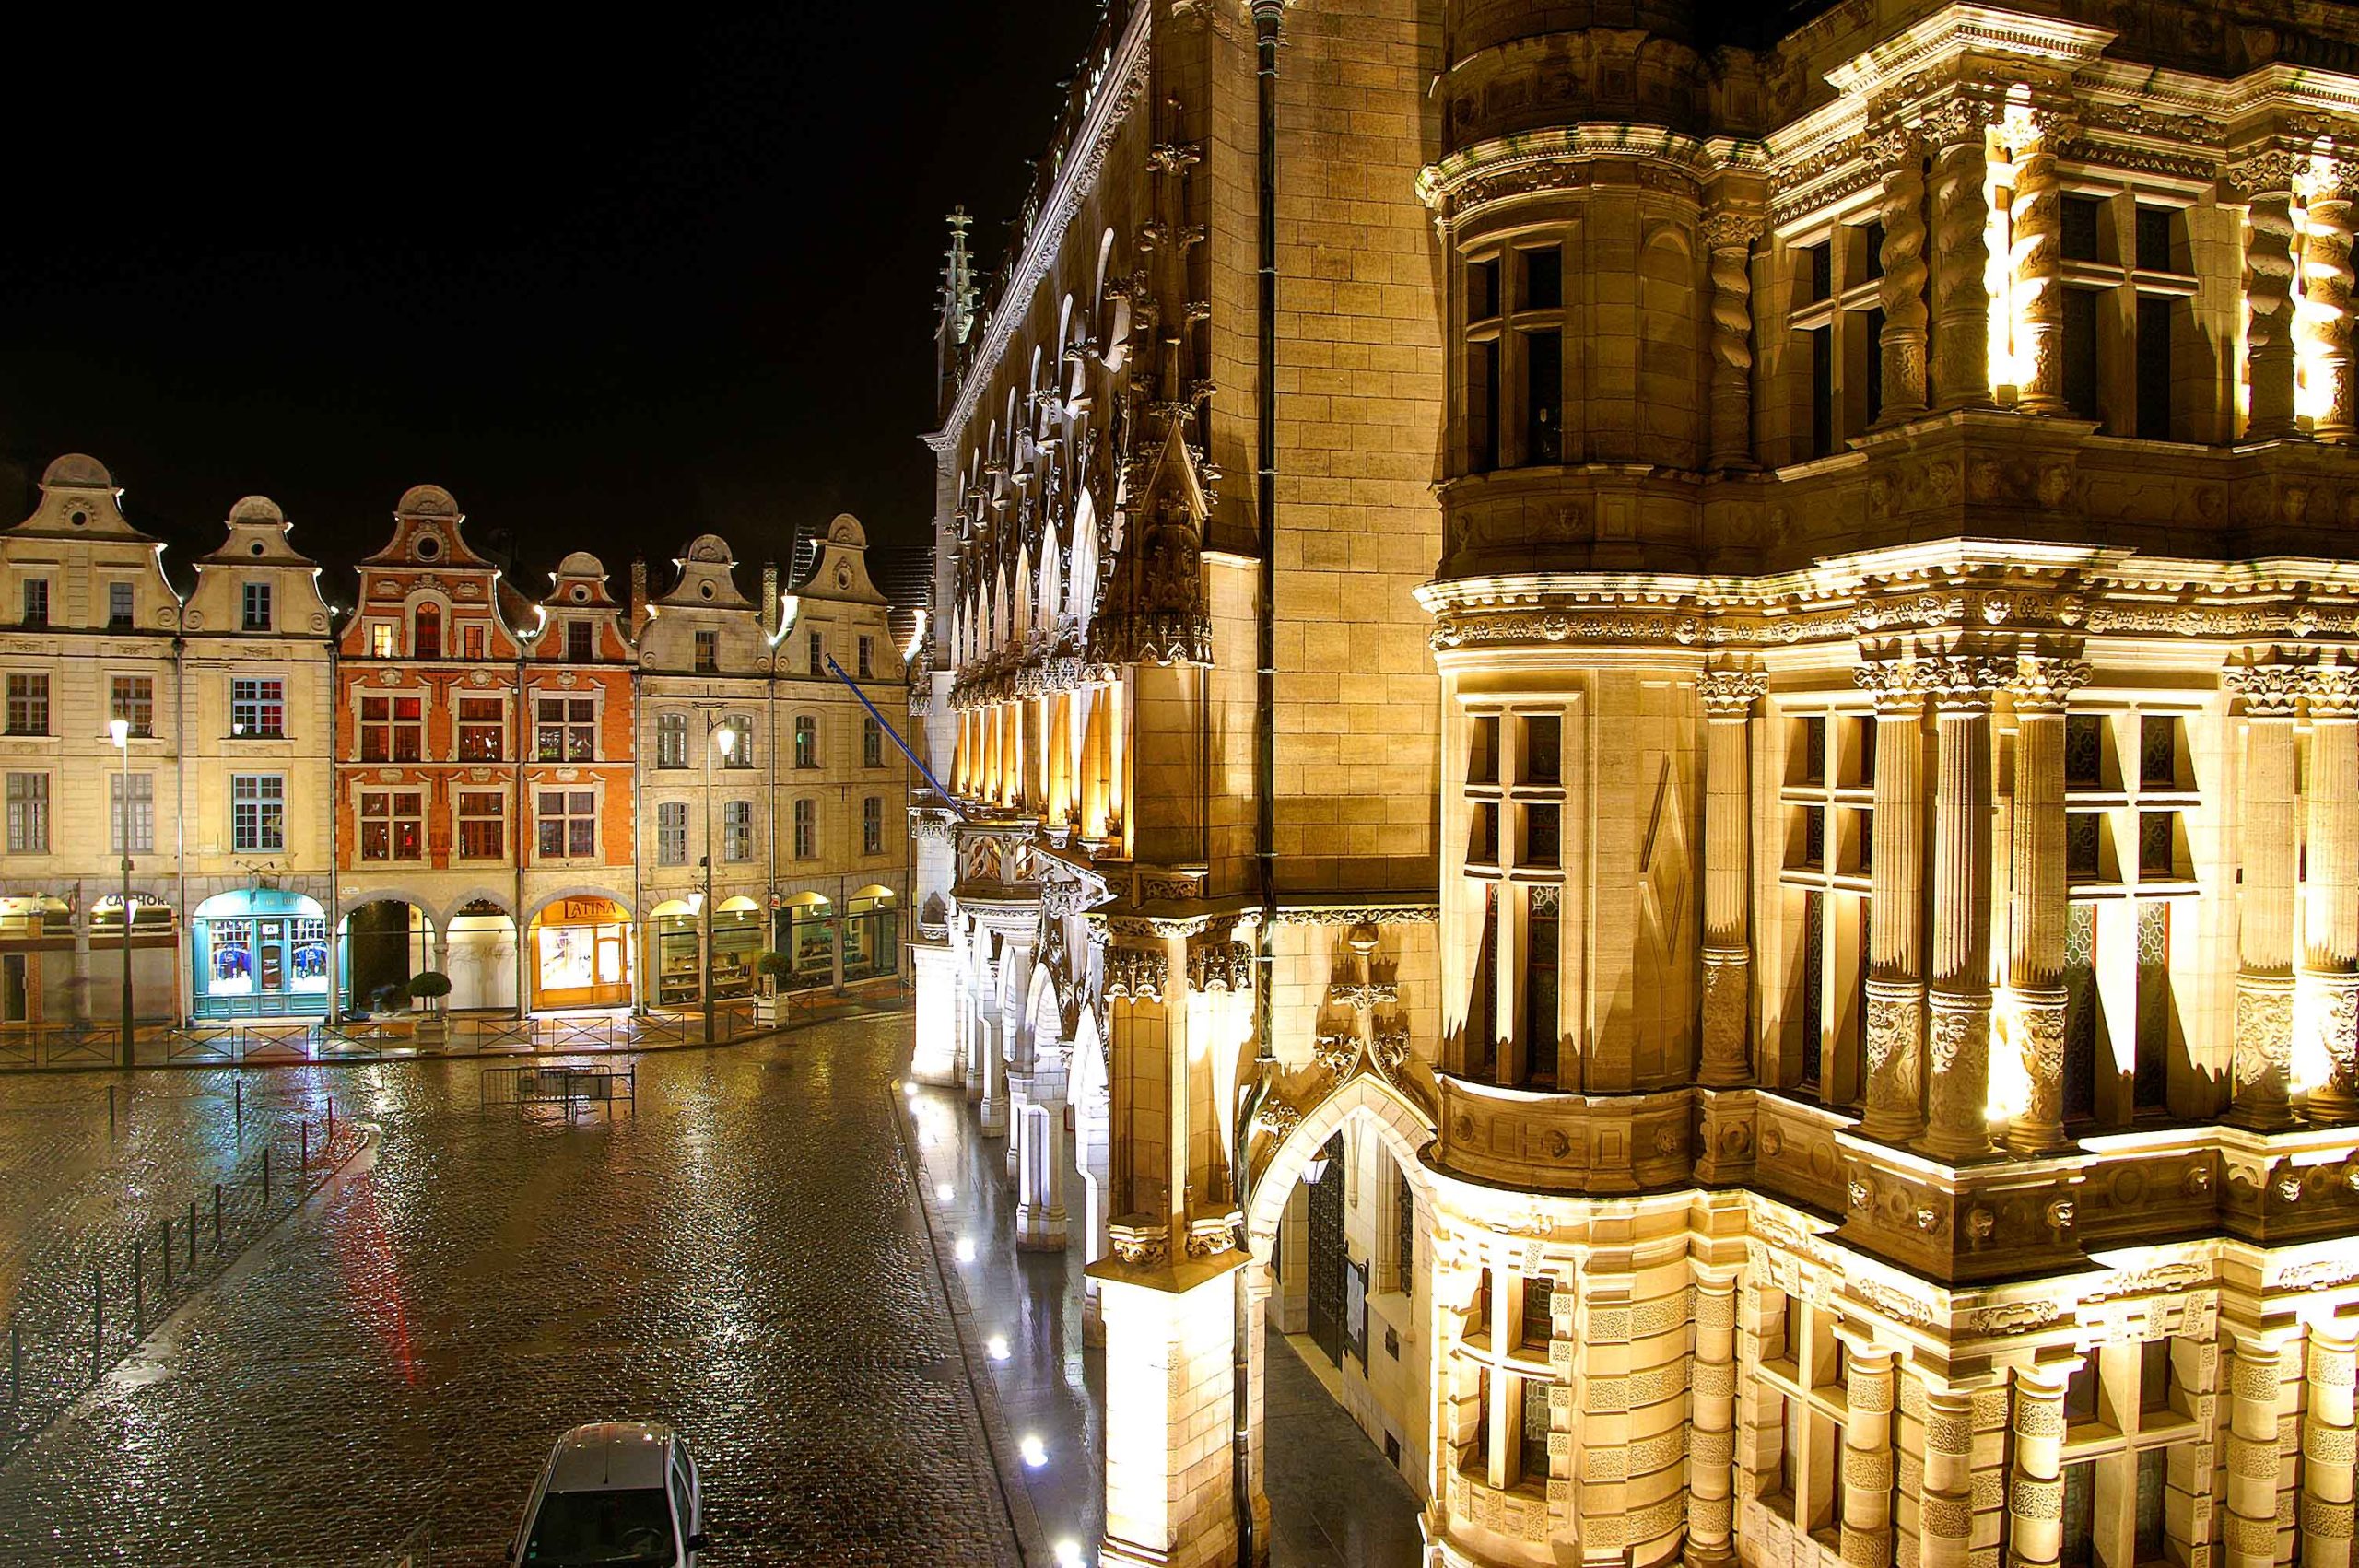 Arras by night © Regardphoto - licence [CC BY-SA 4.0] from Wikimedia Commons